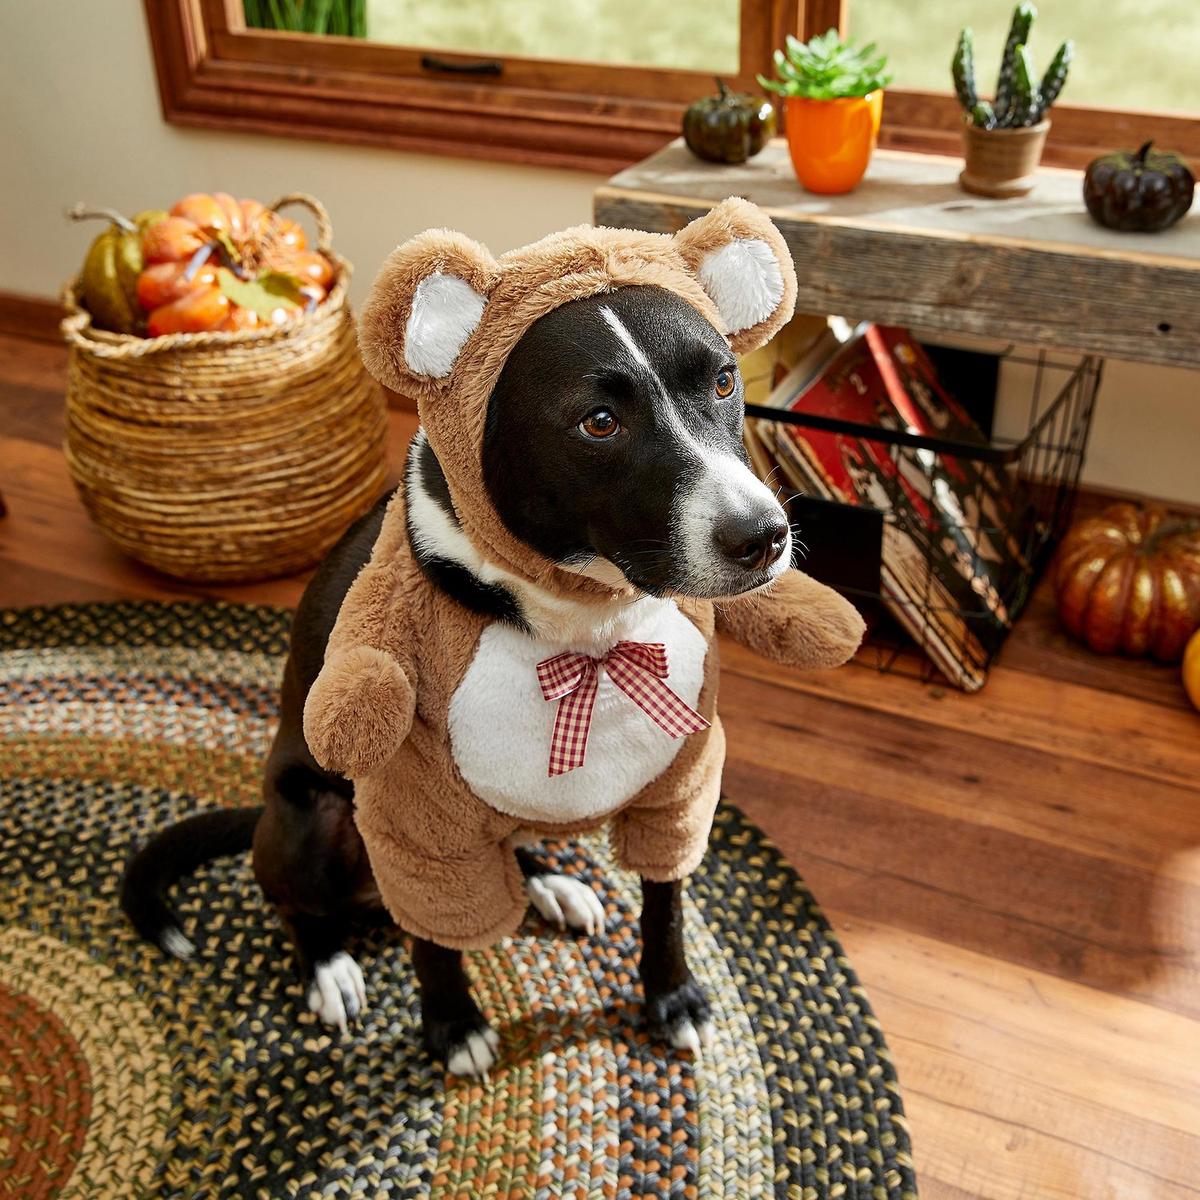 The Best Halloween Dog Costumes for 2021 - BringFido